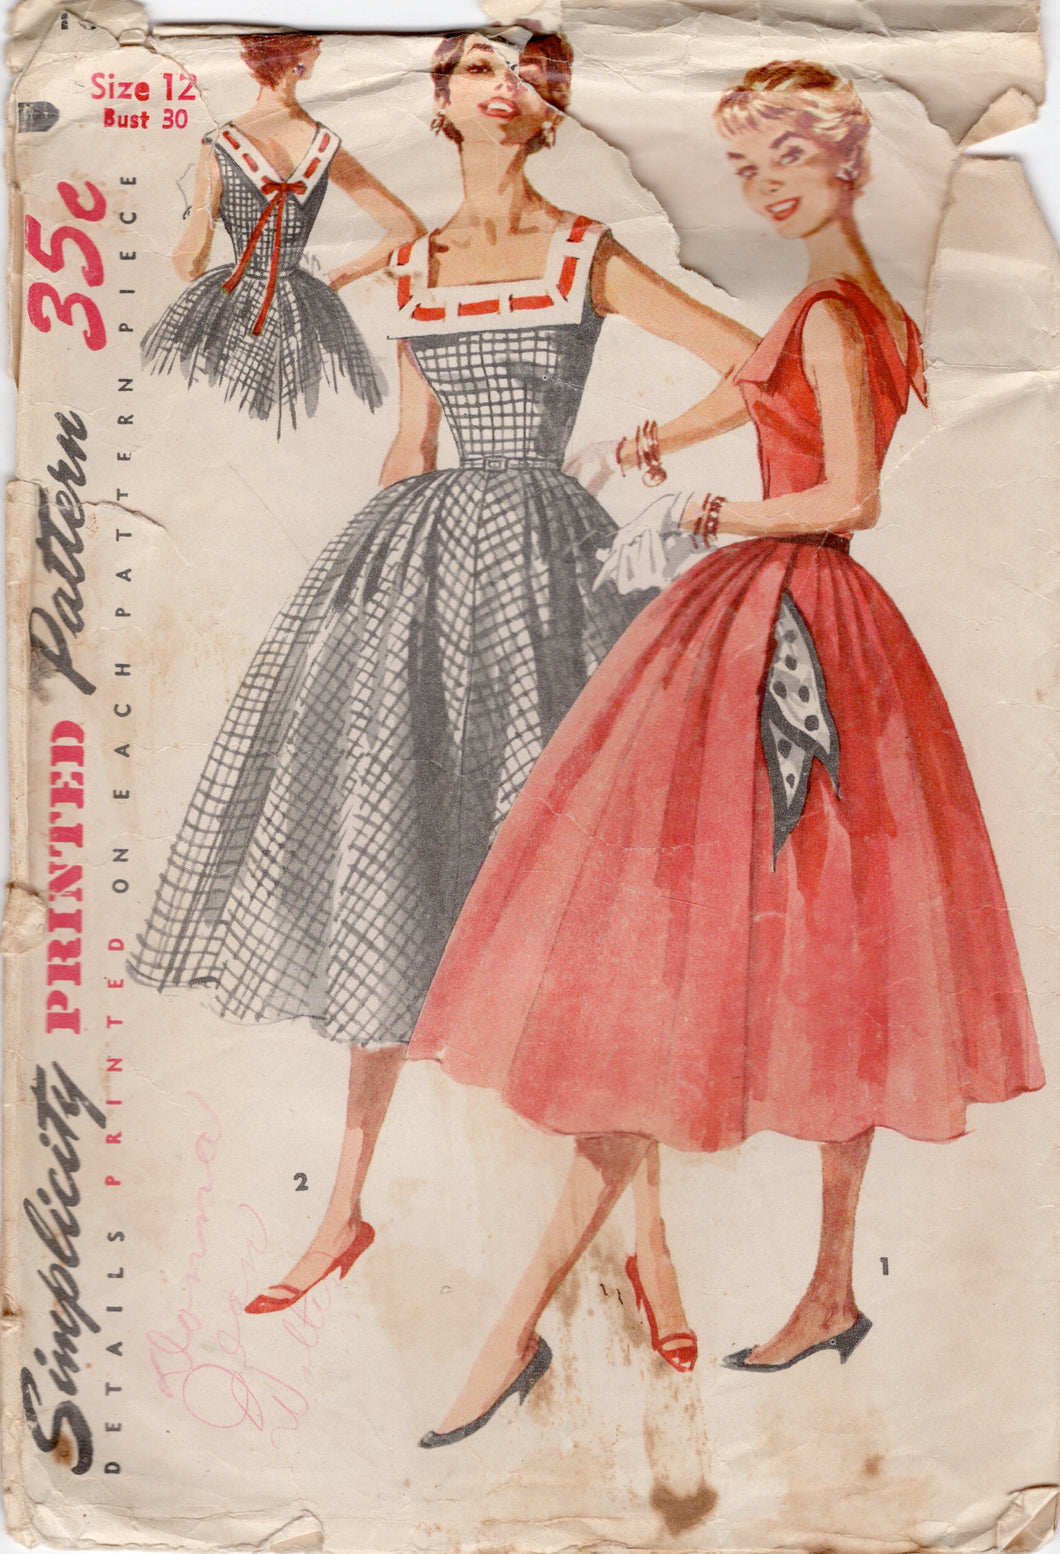 1950's Simplicity Fit and Flare Dress Pattern with Square Neckline and Large Collar - Bust 30